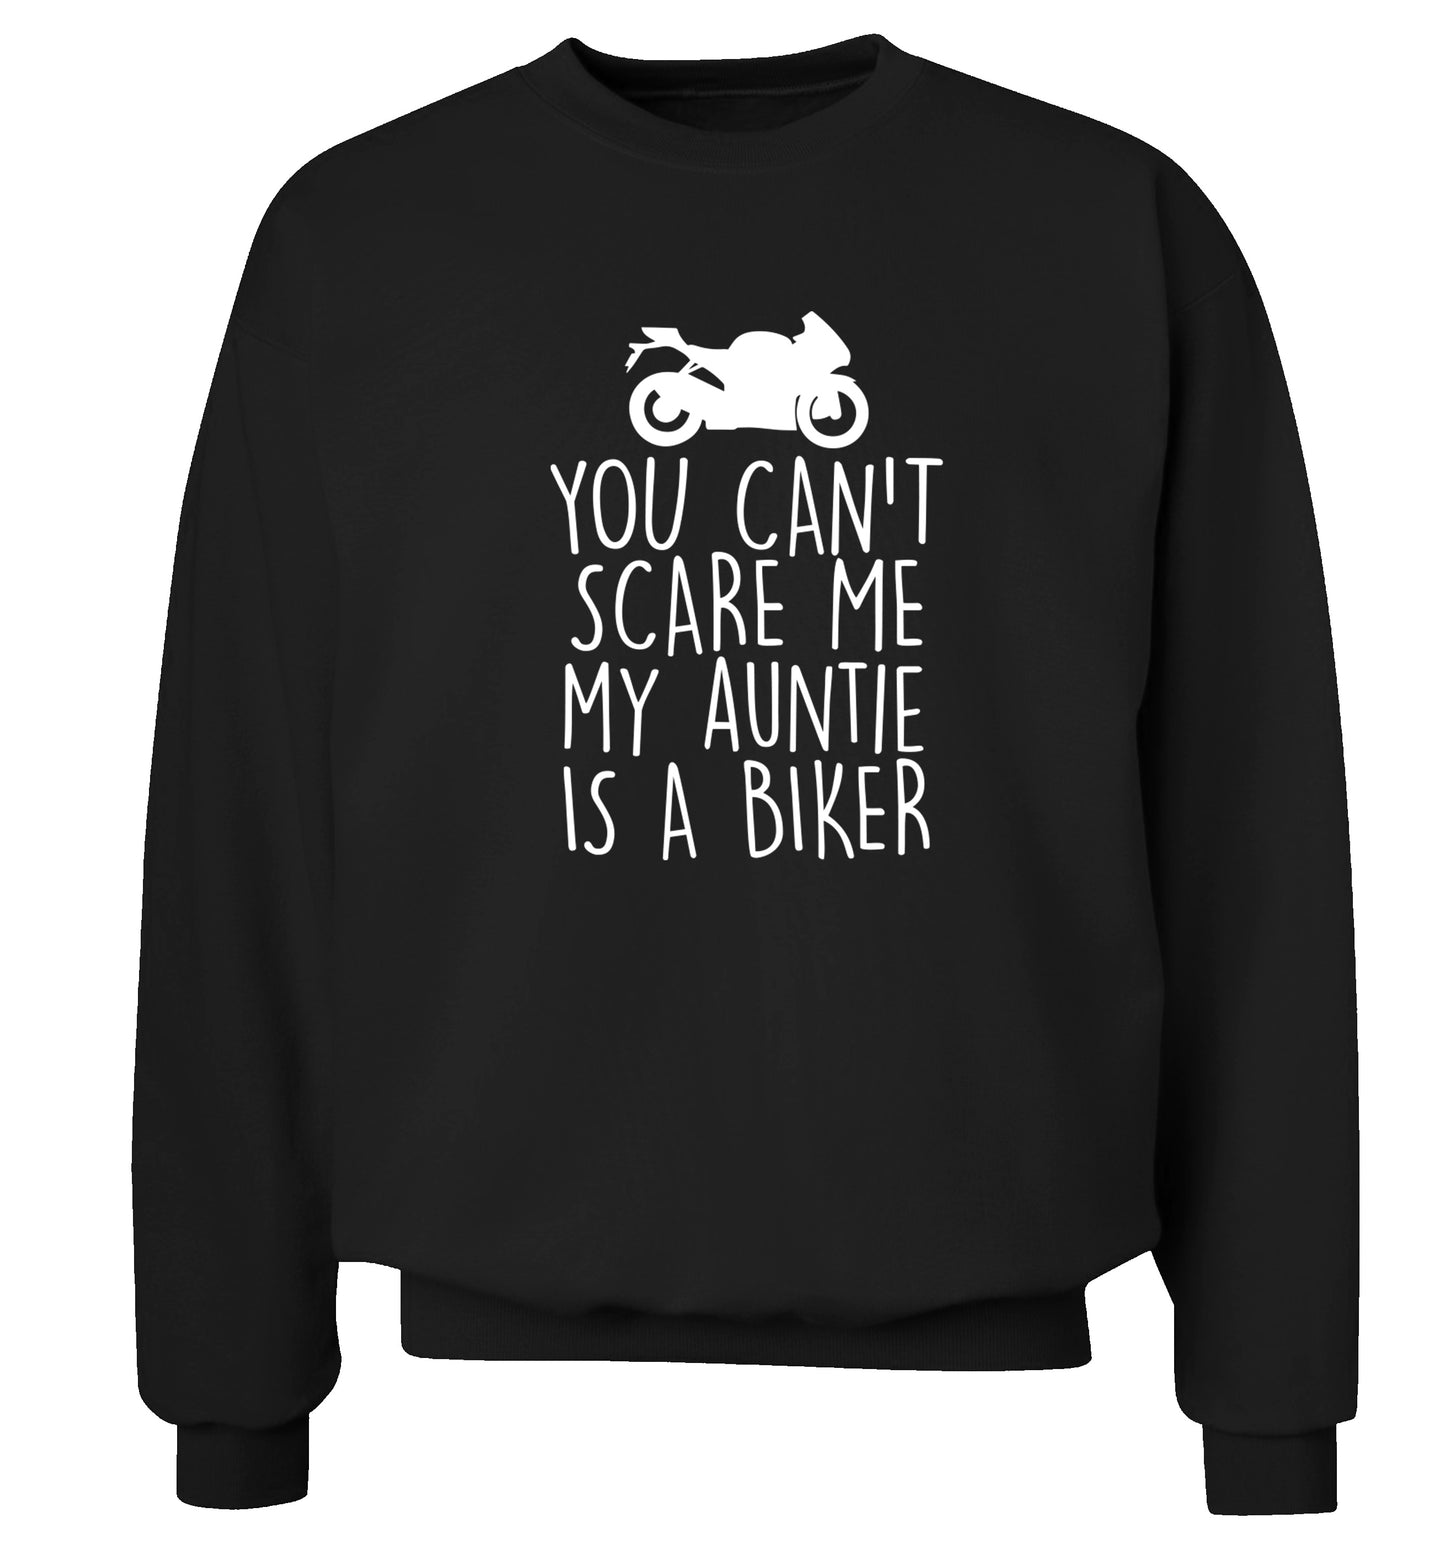 You can't scare me my auntie is a biker Adult's unisex black Sweater 2XL